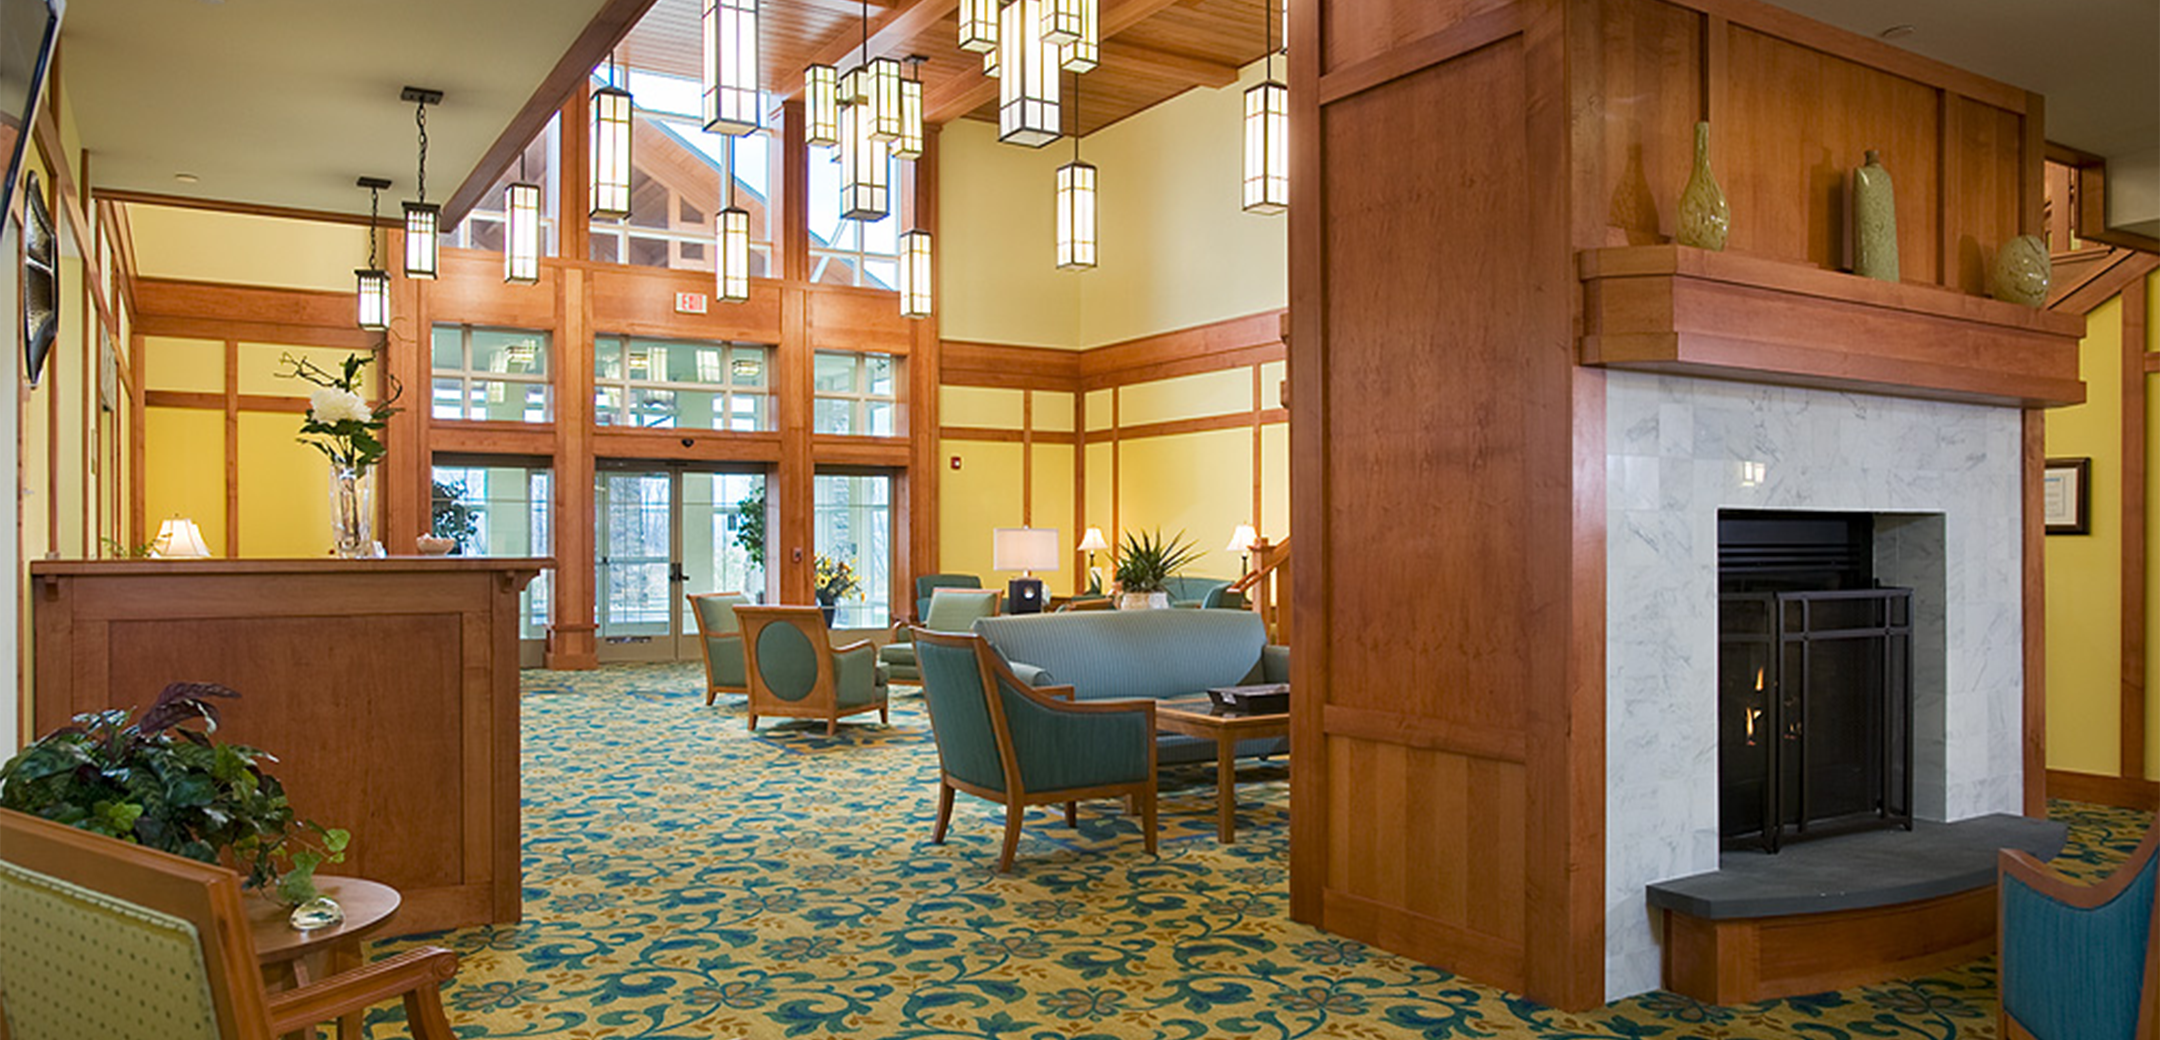 An interior view of the Vantage Point showcasing the lobby reception desk and central wooden pilar with a fireplace and seating in the background.